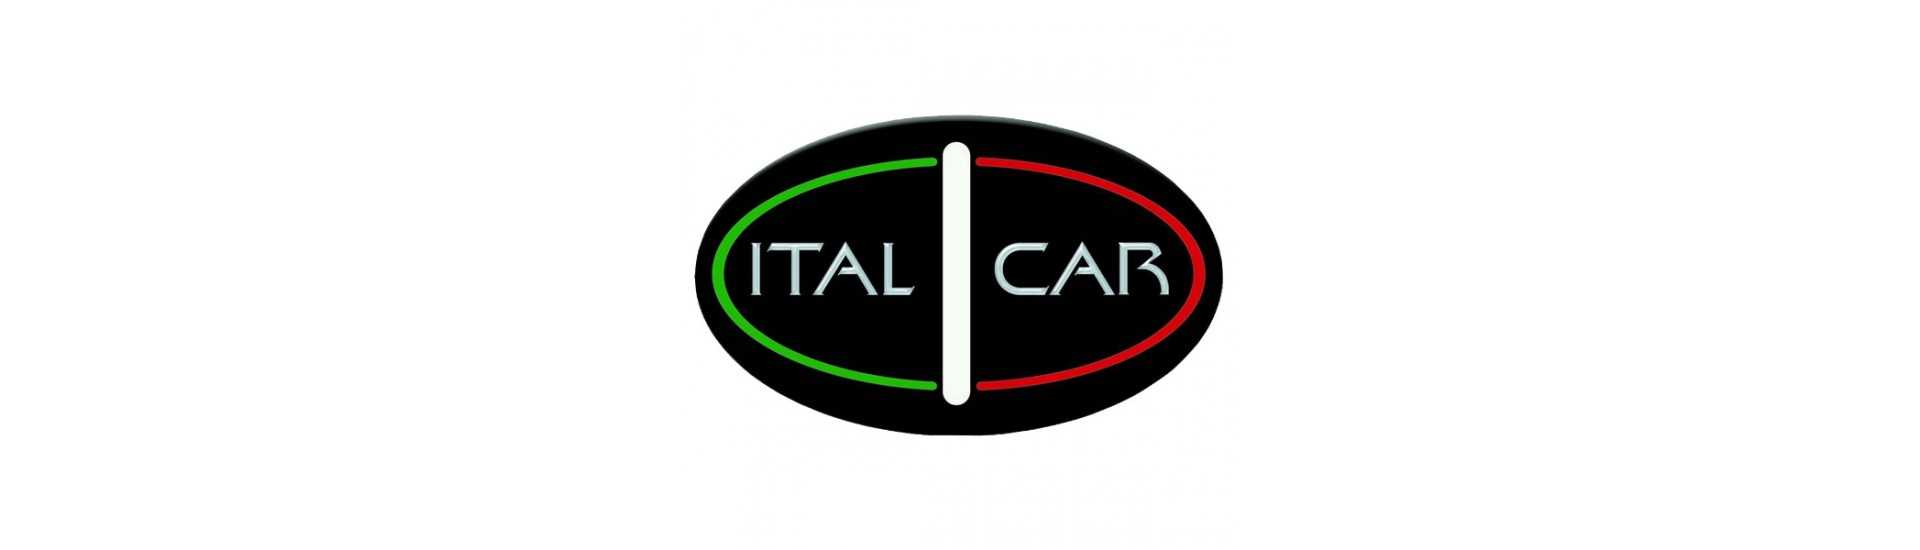 Occasion parts at the best price for Italcar